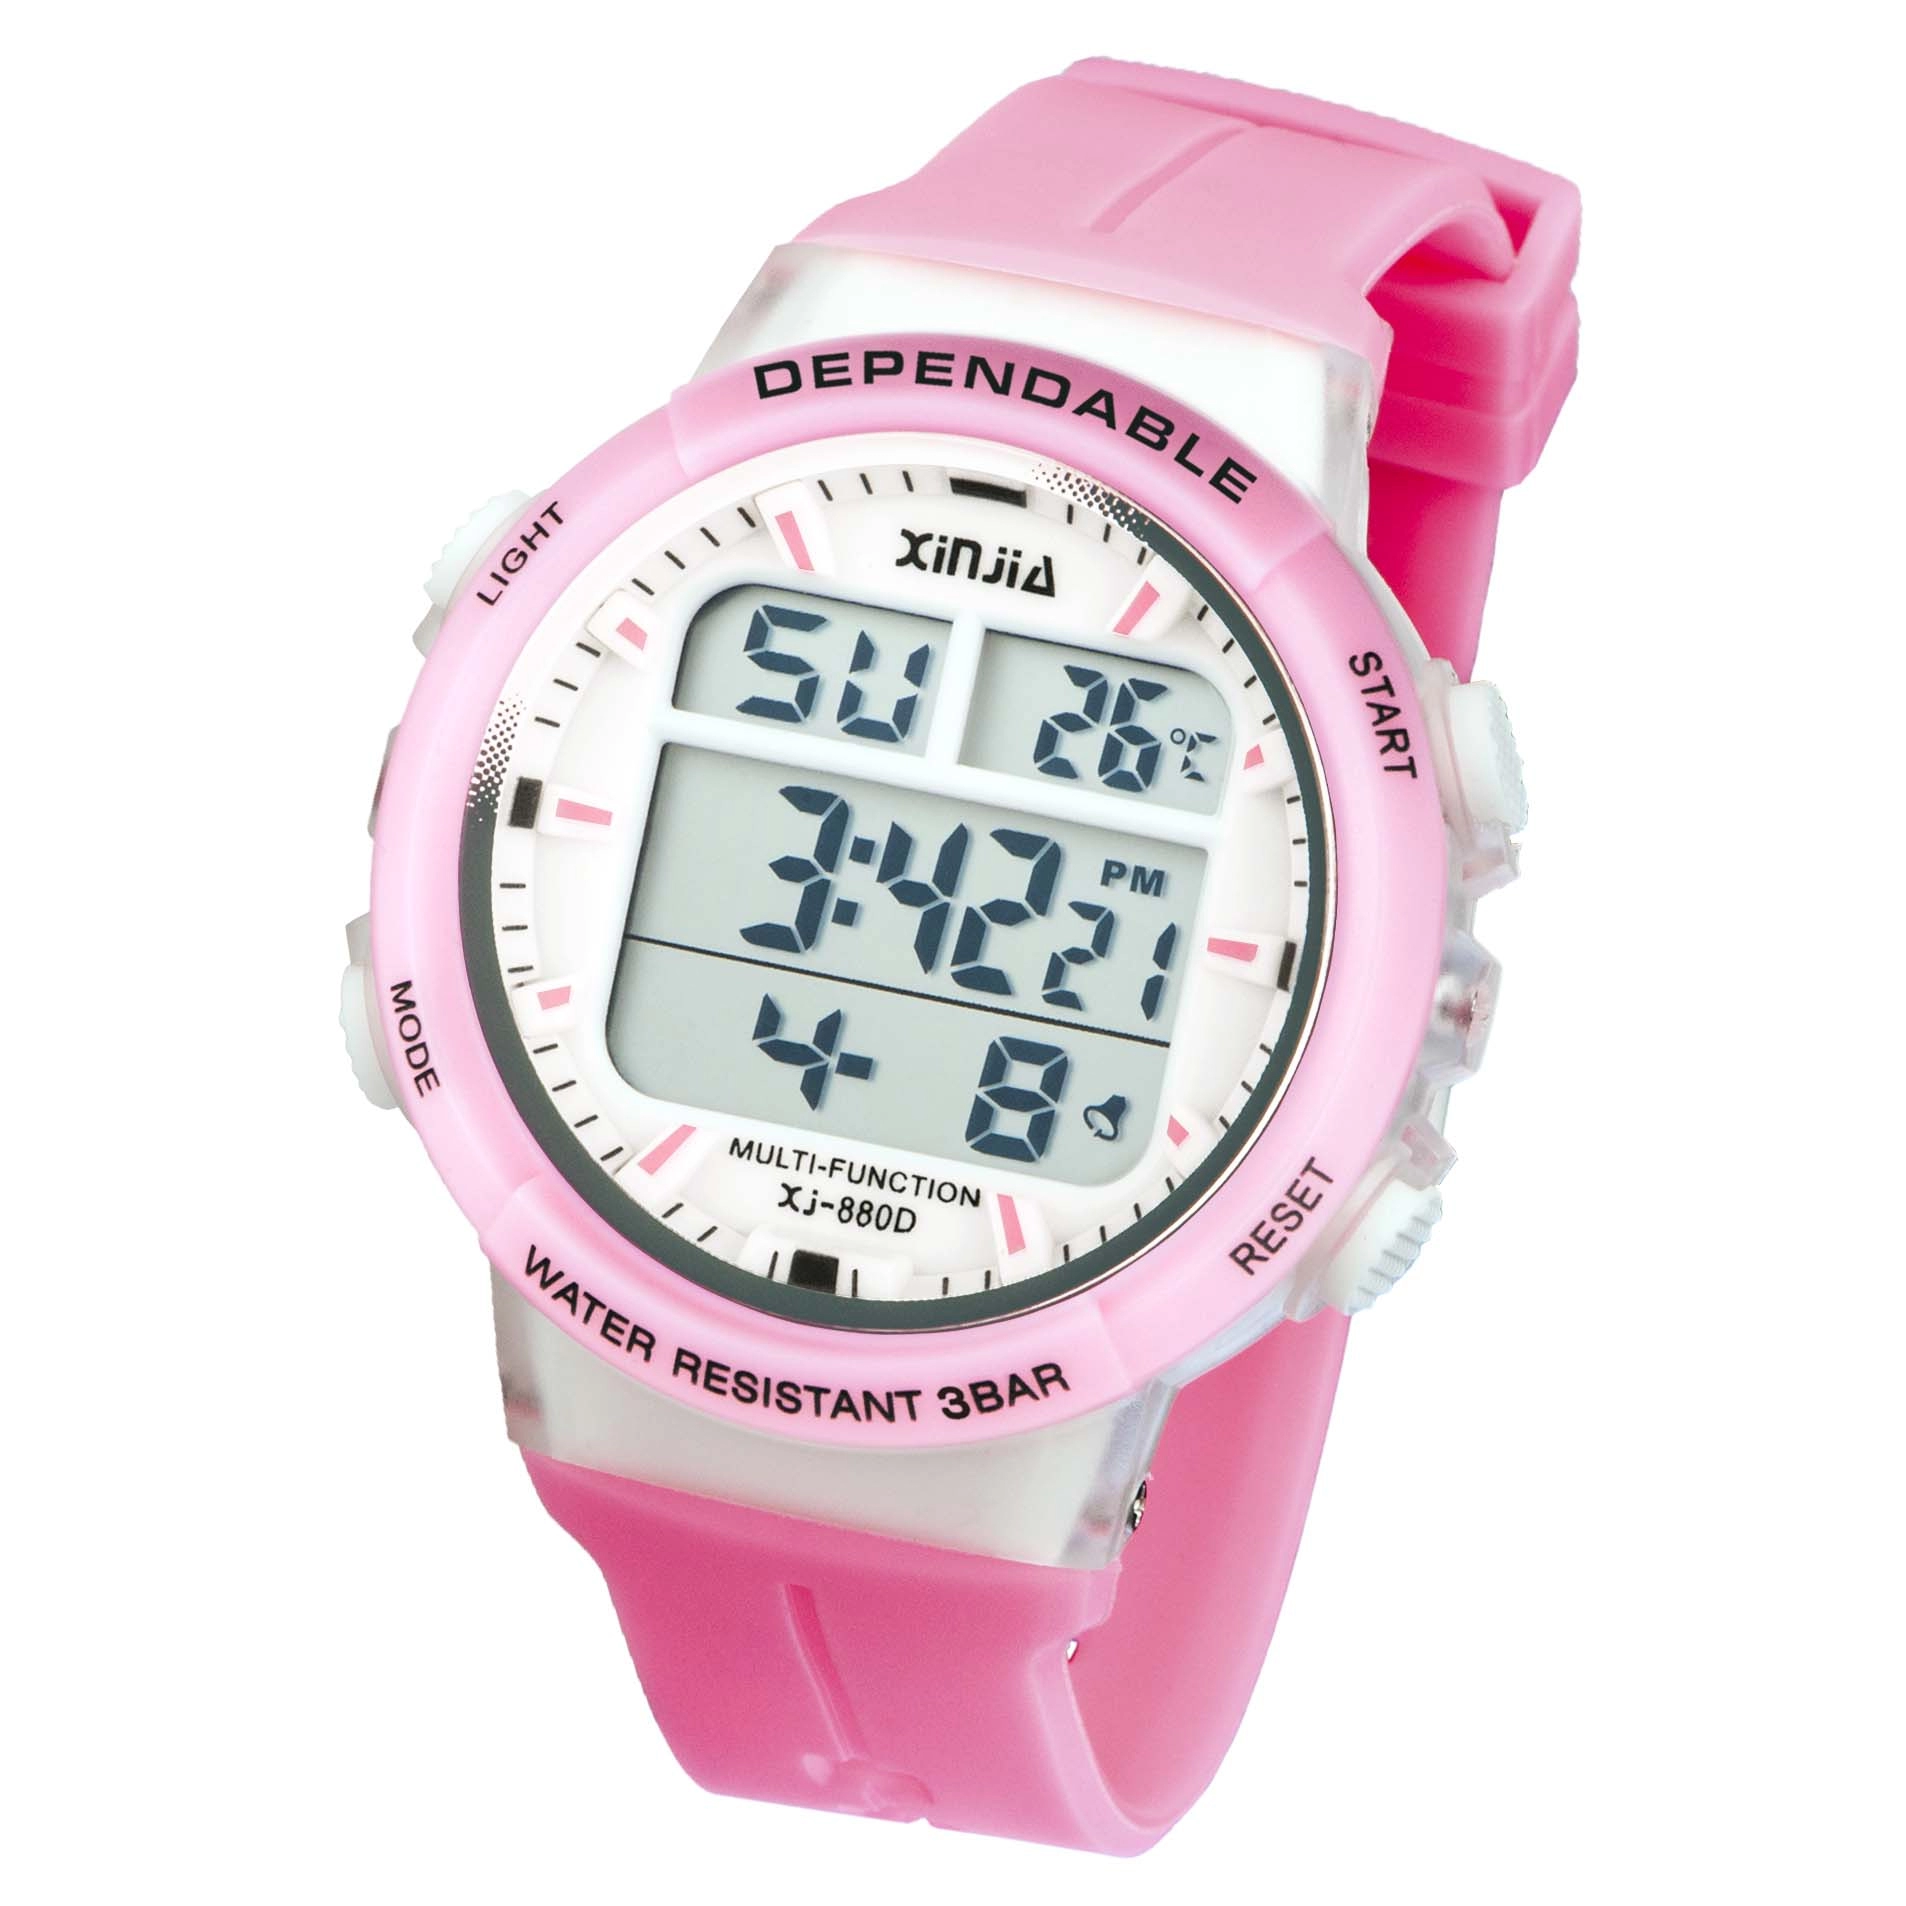 Water Resistant Digital Mens Wrist Watch With Temperature